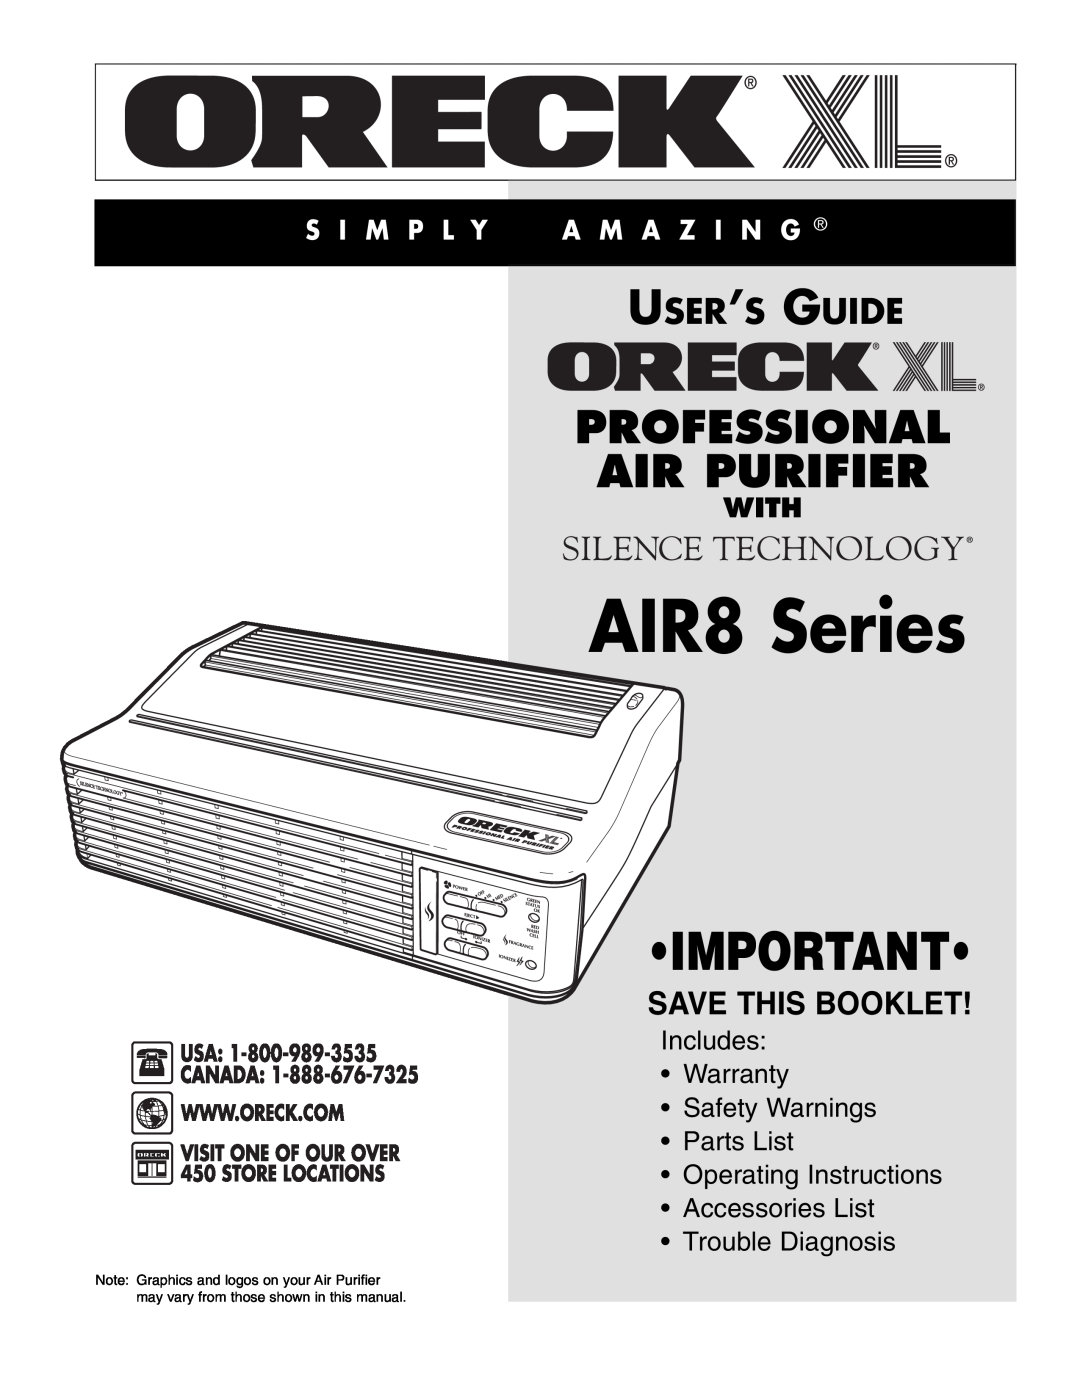 Oreck AIR8 Series warranty Professional Air Purifier, User’S Guide, Save This Booklet, S I M P L Y A M A Z I N G, With 